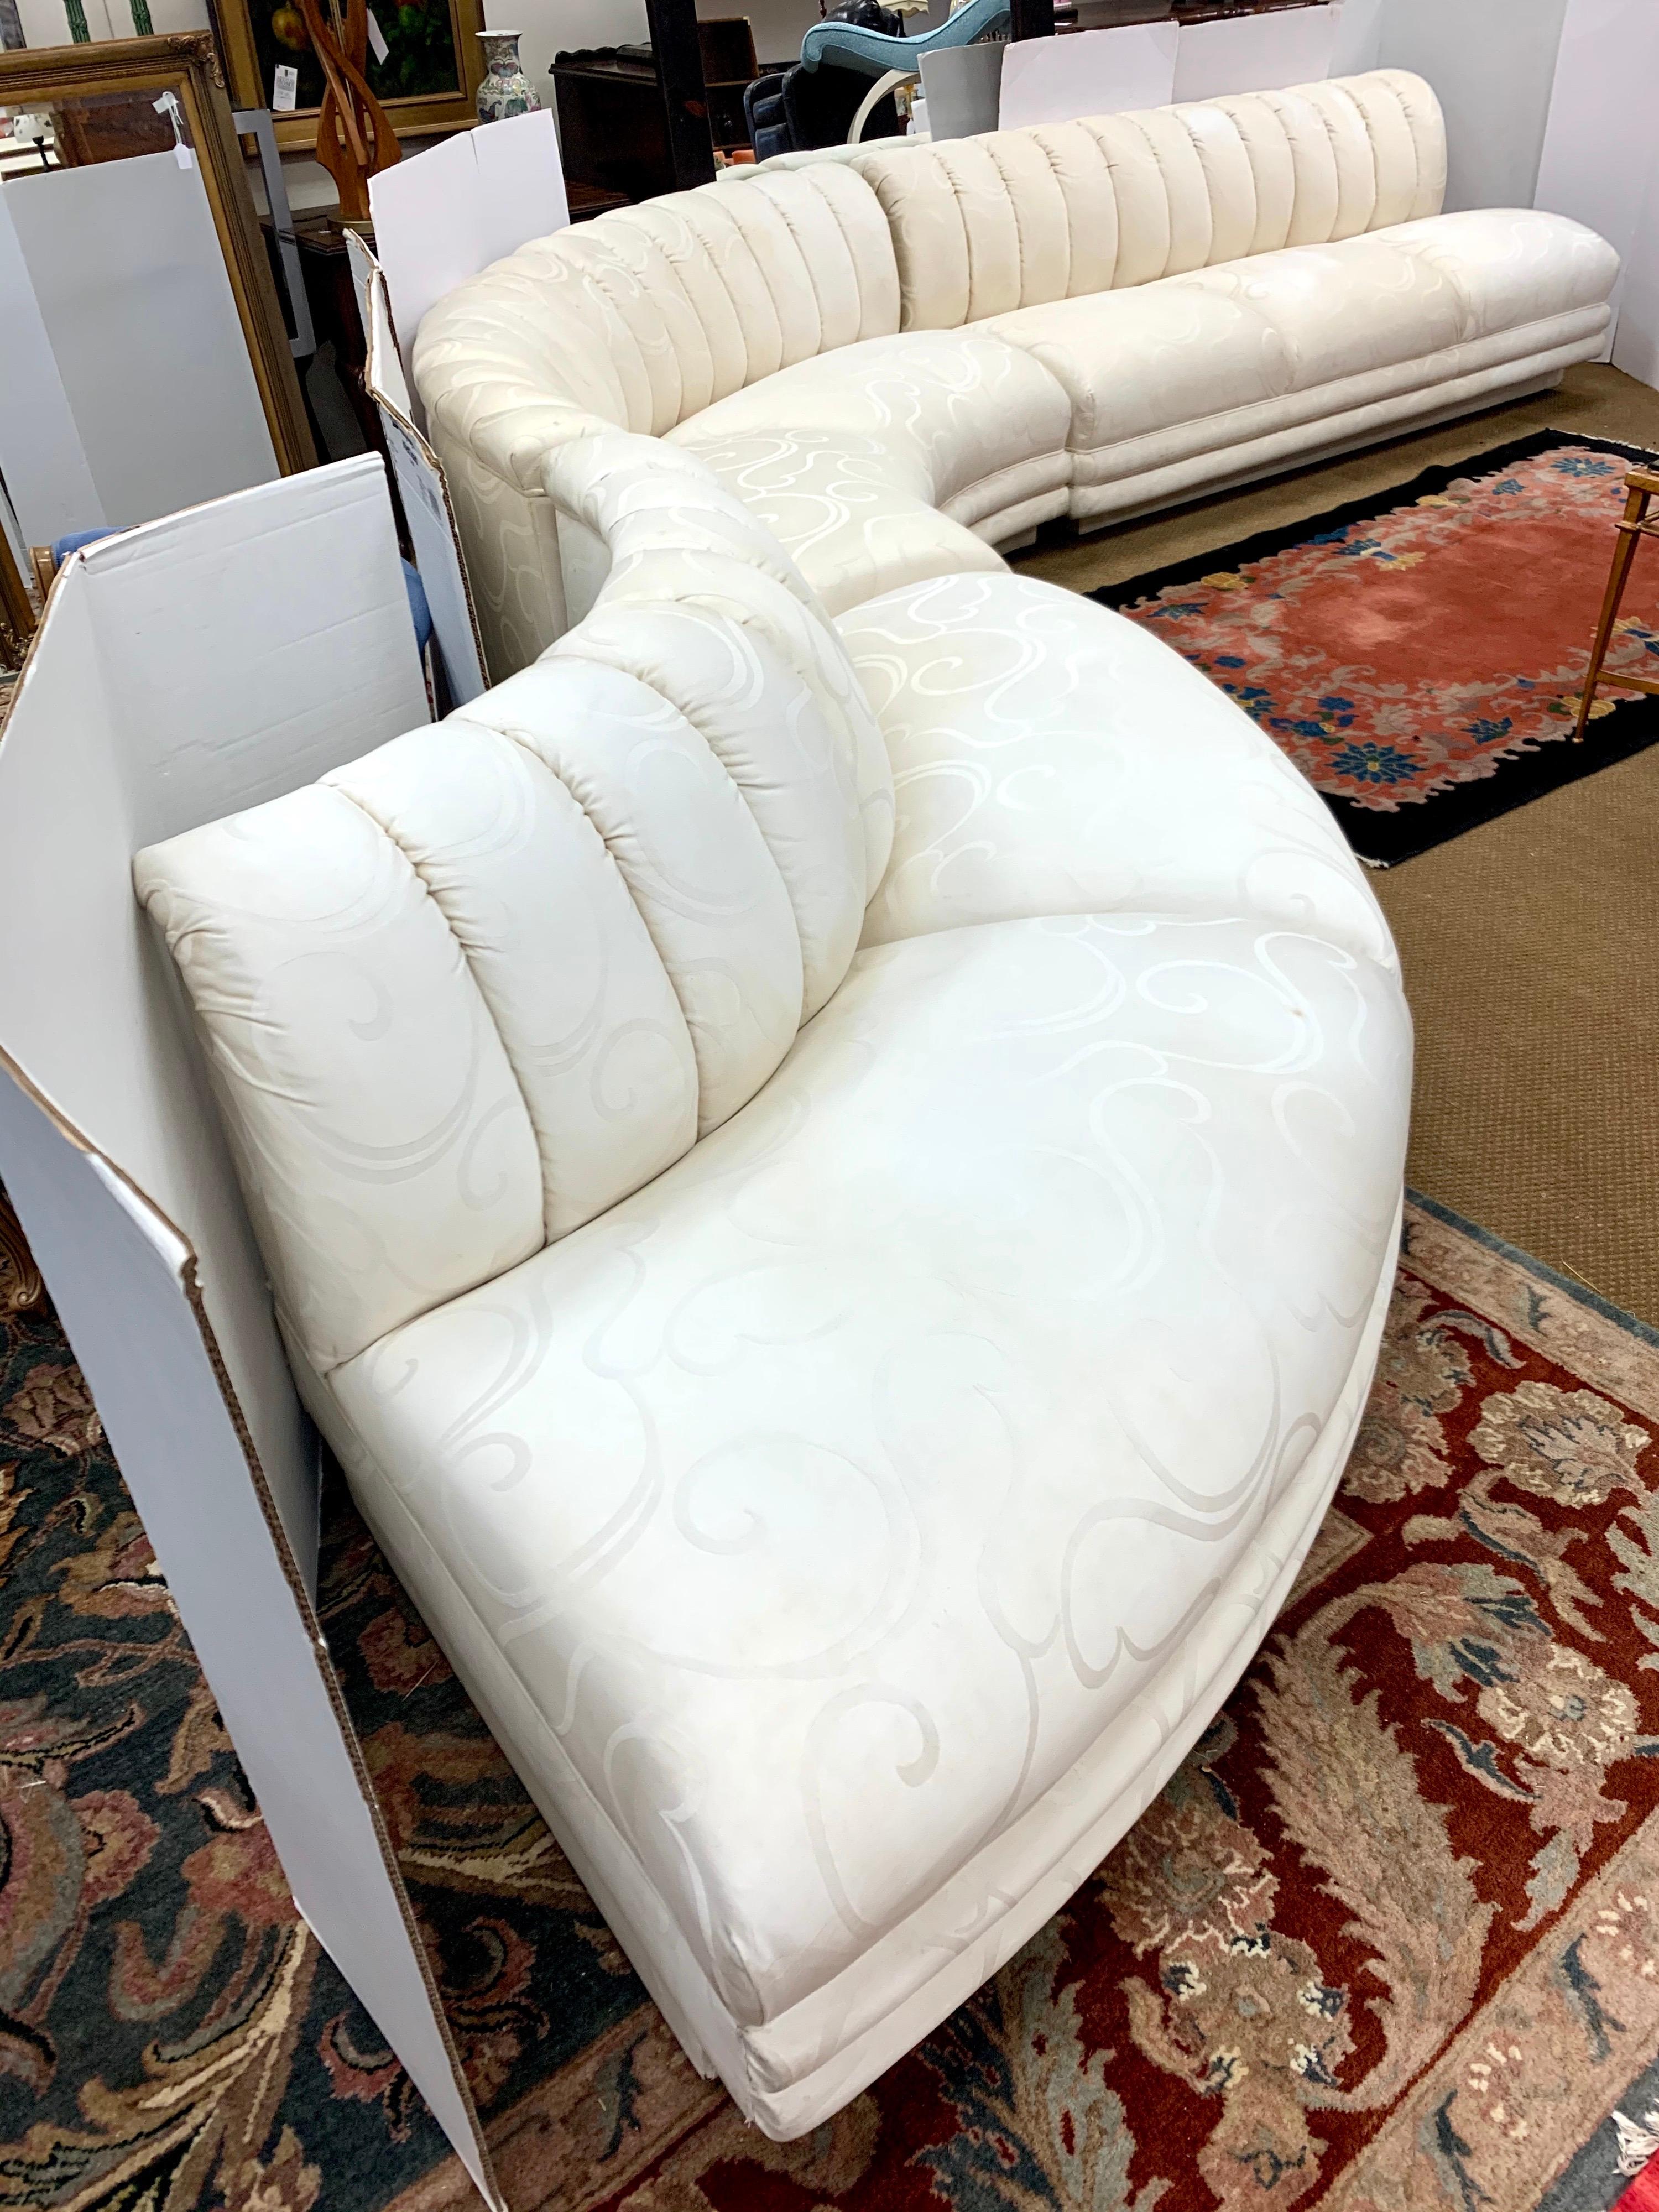 Coveted Kagan three piece modular sectional sofa with off white/cream colored fabric.
The three pieces measure just under fifteen feet wide, so you'll need a large room. These rare, 
serpentine sofas are hard to find, especially modular ones like